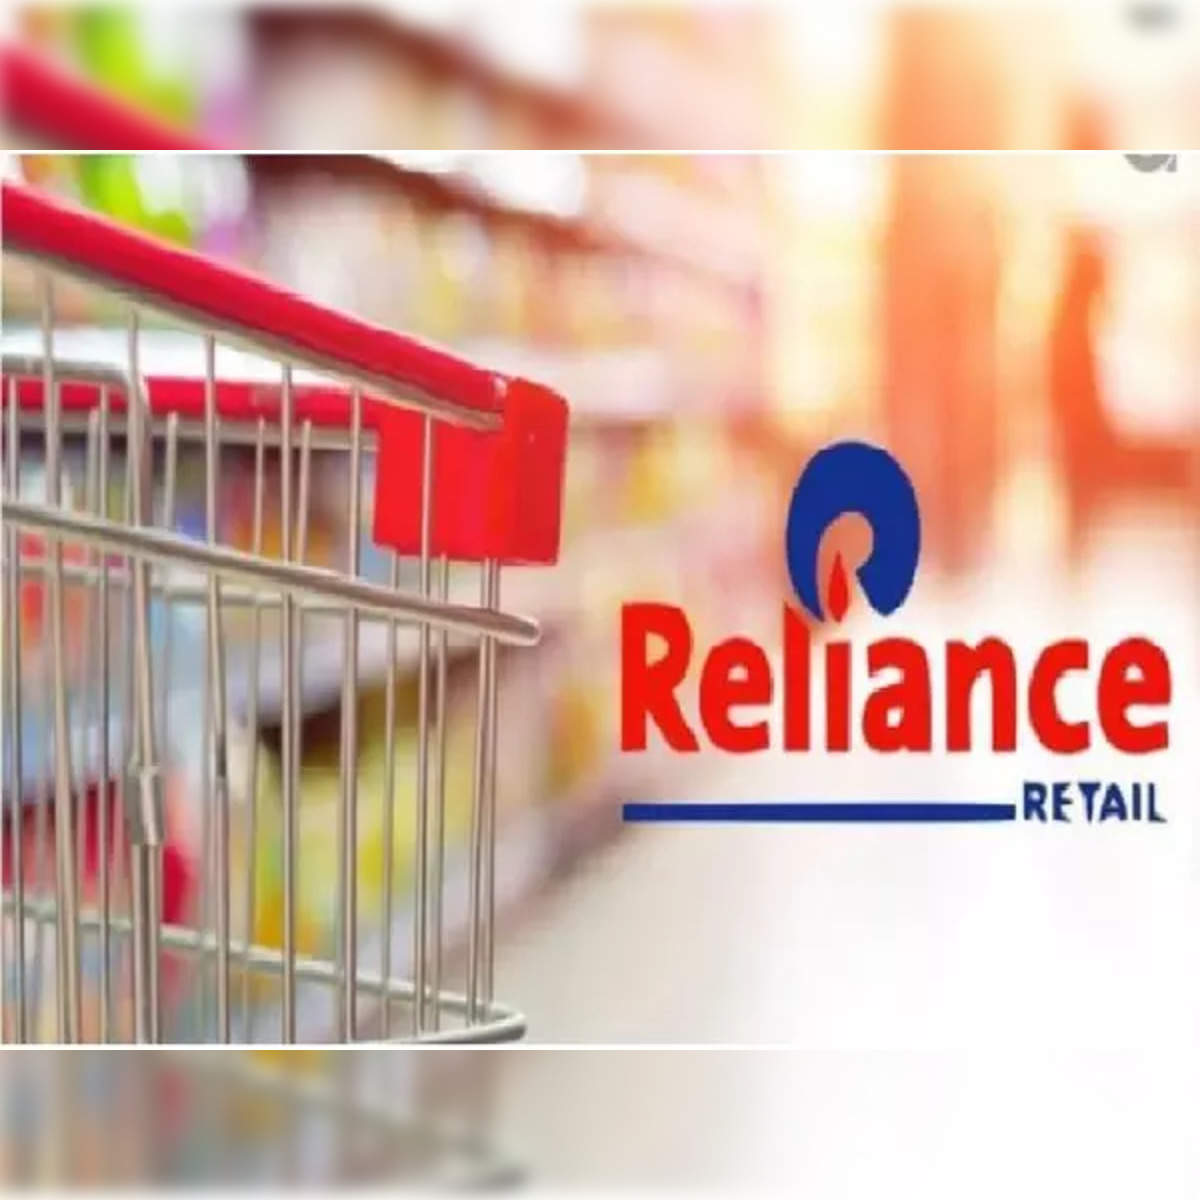 Reliance retail stake sale: Qatar sovereign fund looking to pick stake in  Ambani's Reliance Retail: Report - The Economic Times